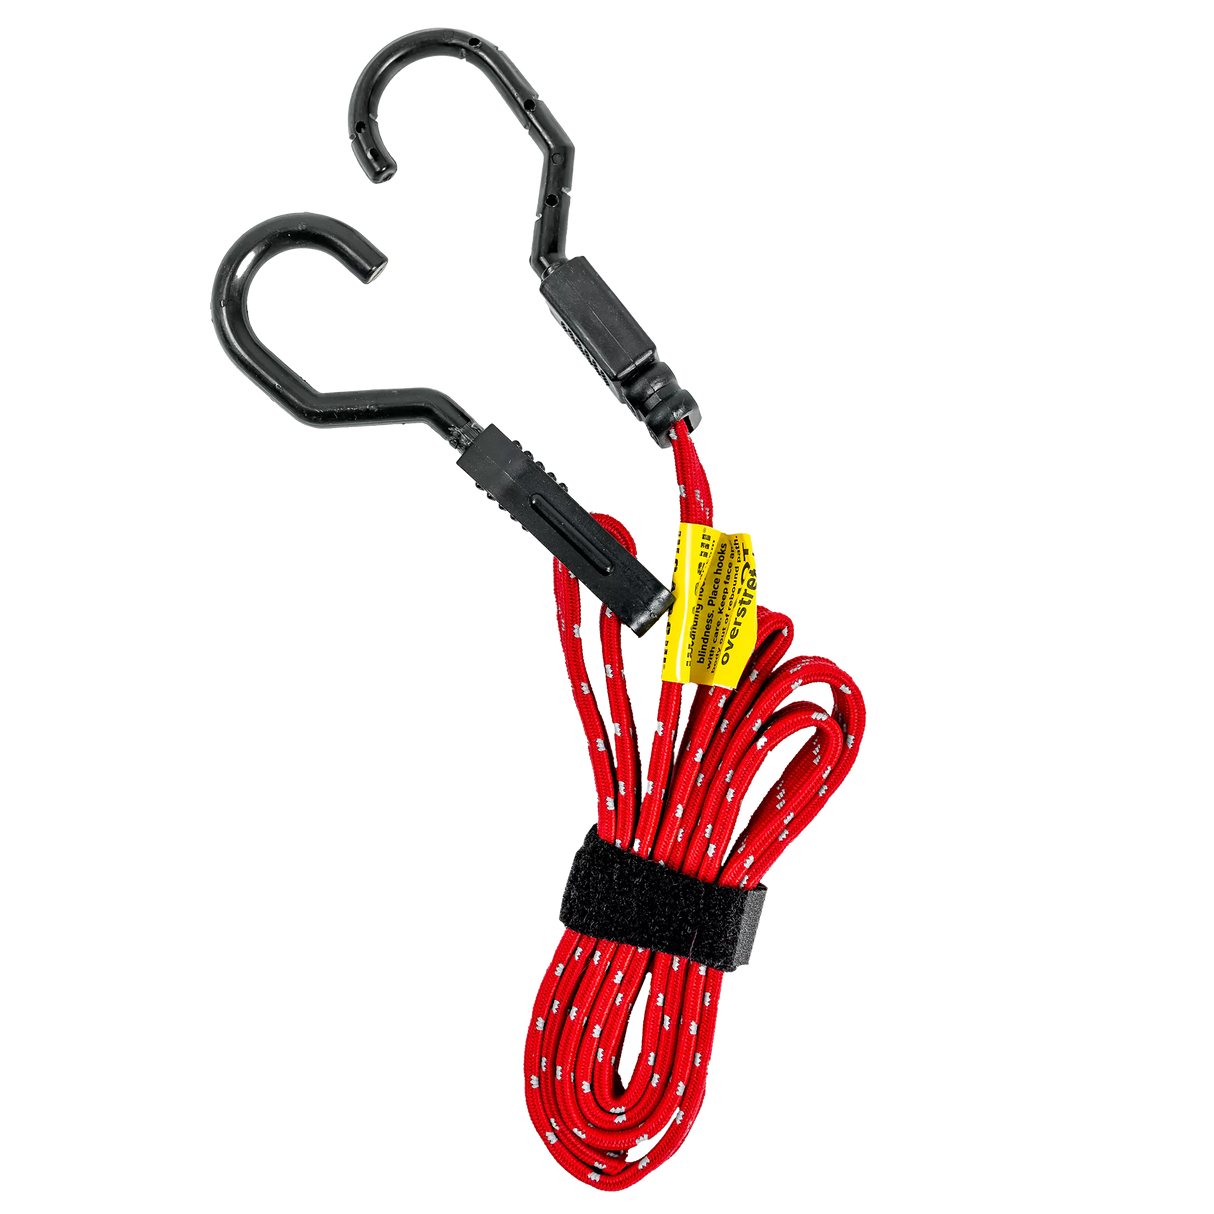 CAOS 1.2m Flat Adjustable Bungee Cord – CAOS Gear